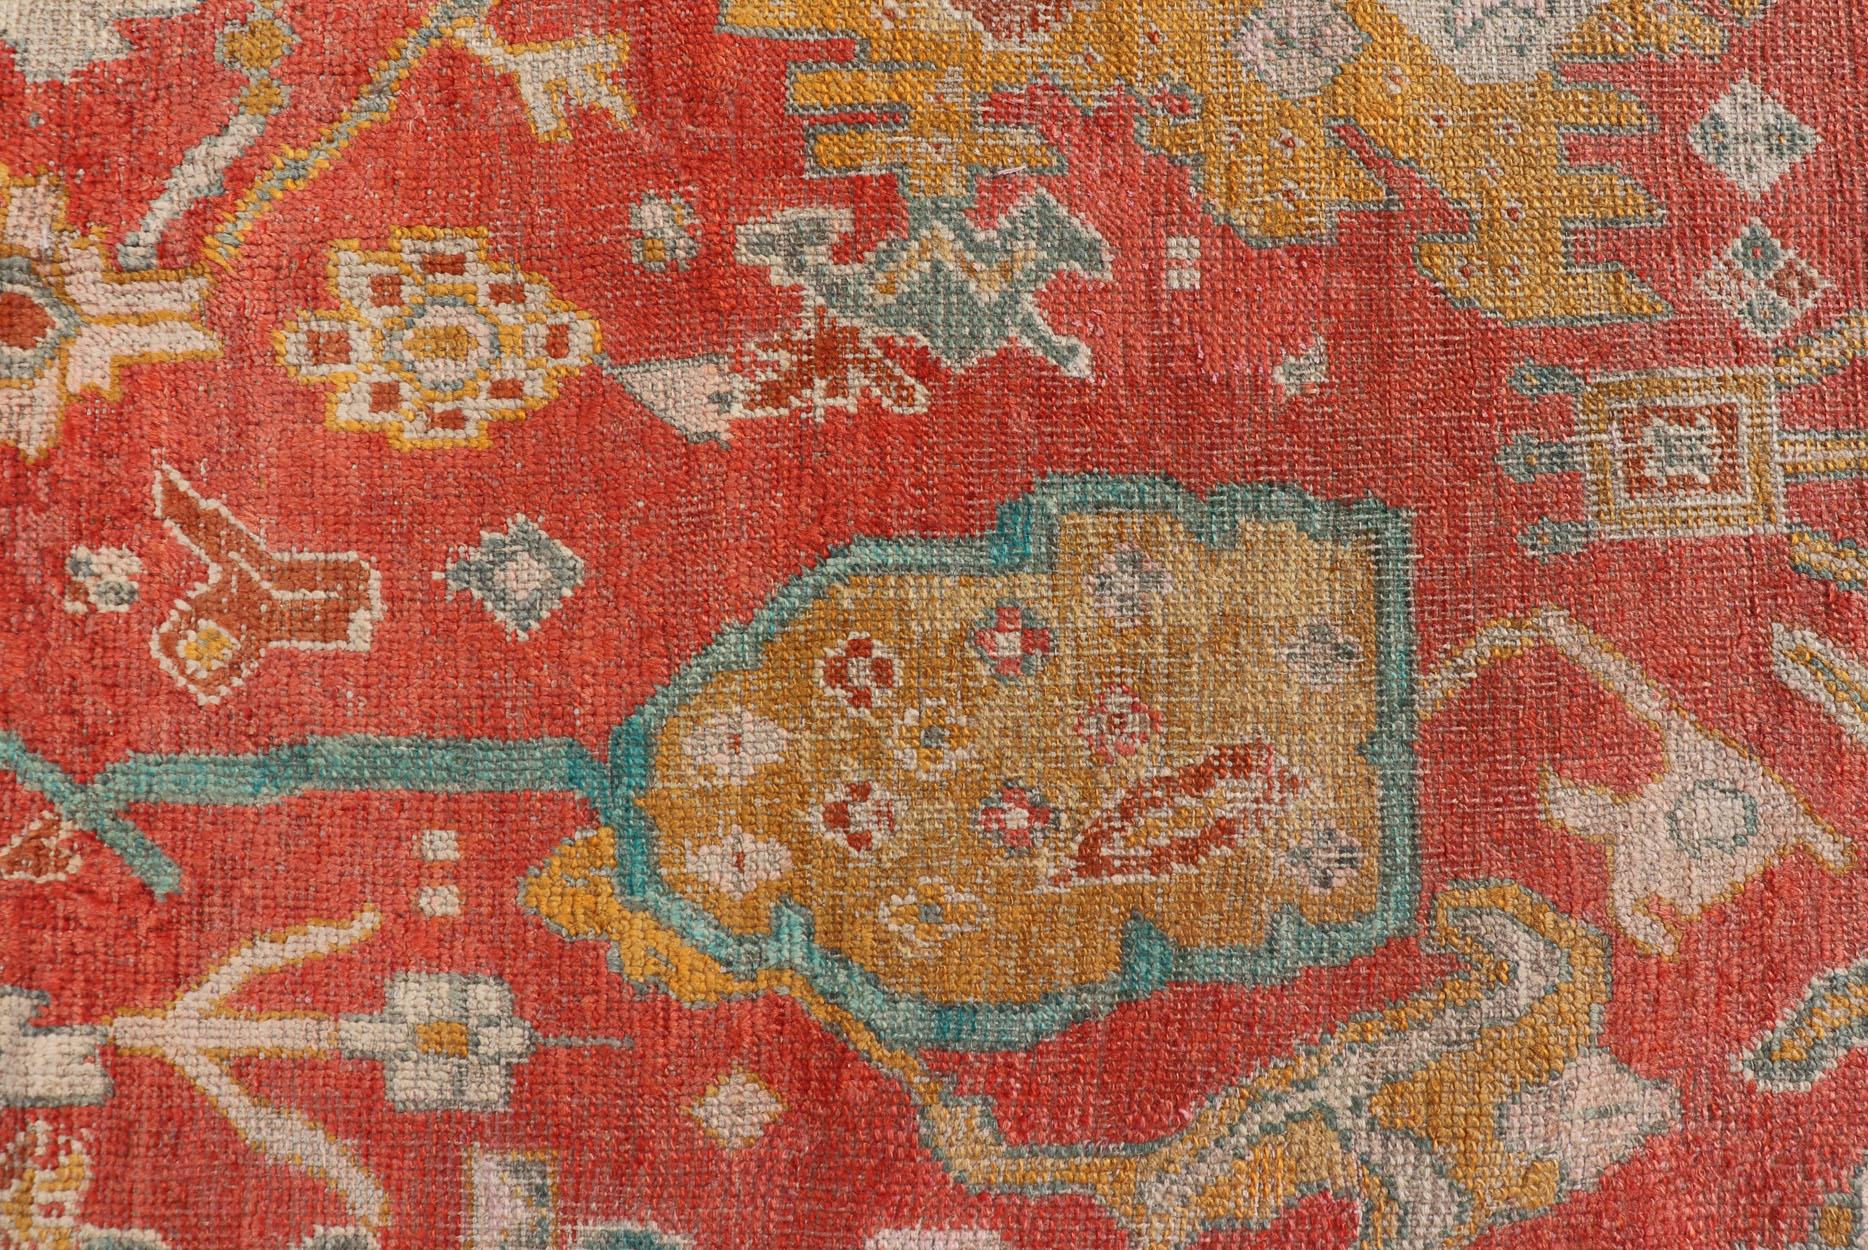 Hand-Knotted Antique Turkish Oushak In Tribal Motifs in Soft Coral, Blue, Marigold, and Cream For Sale